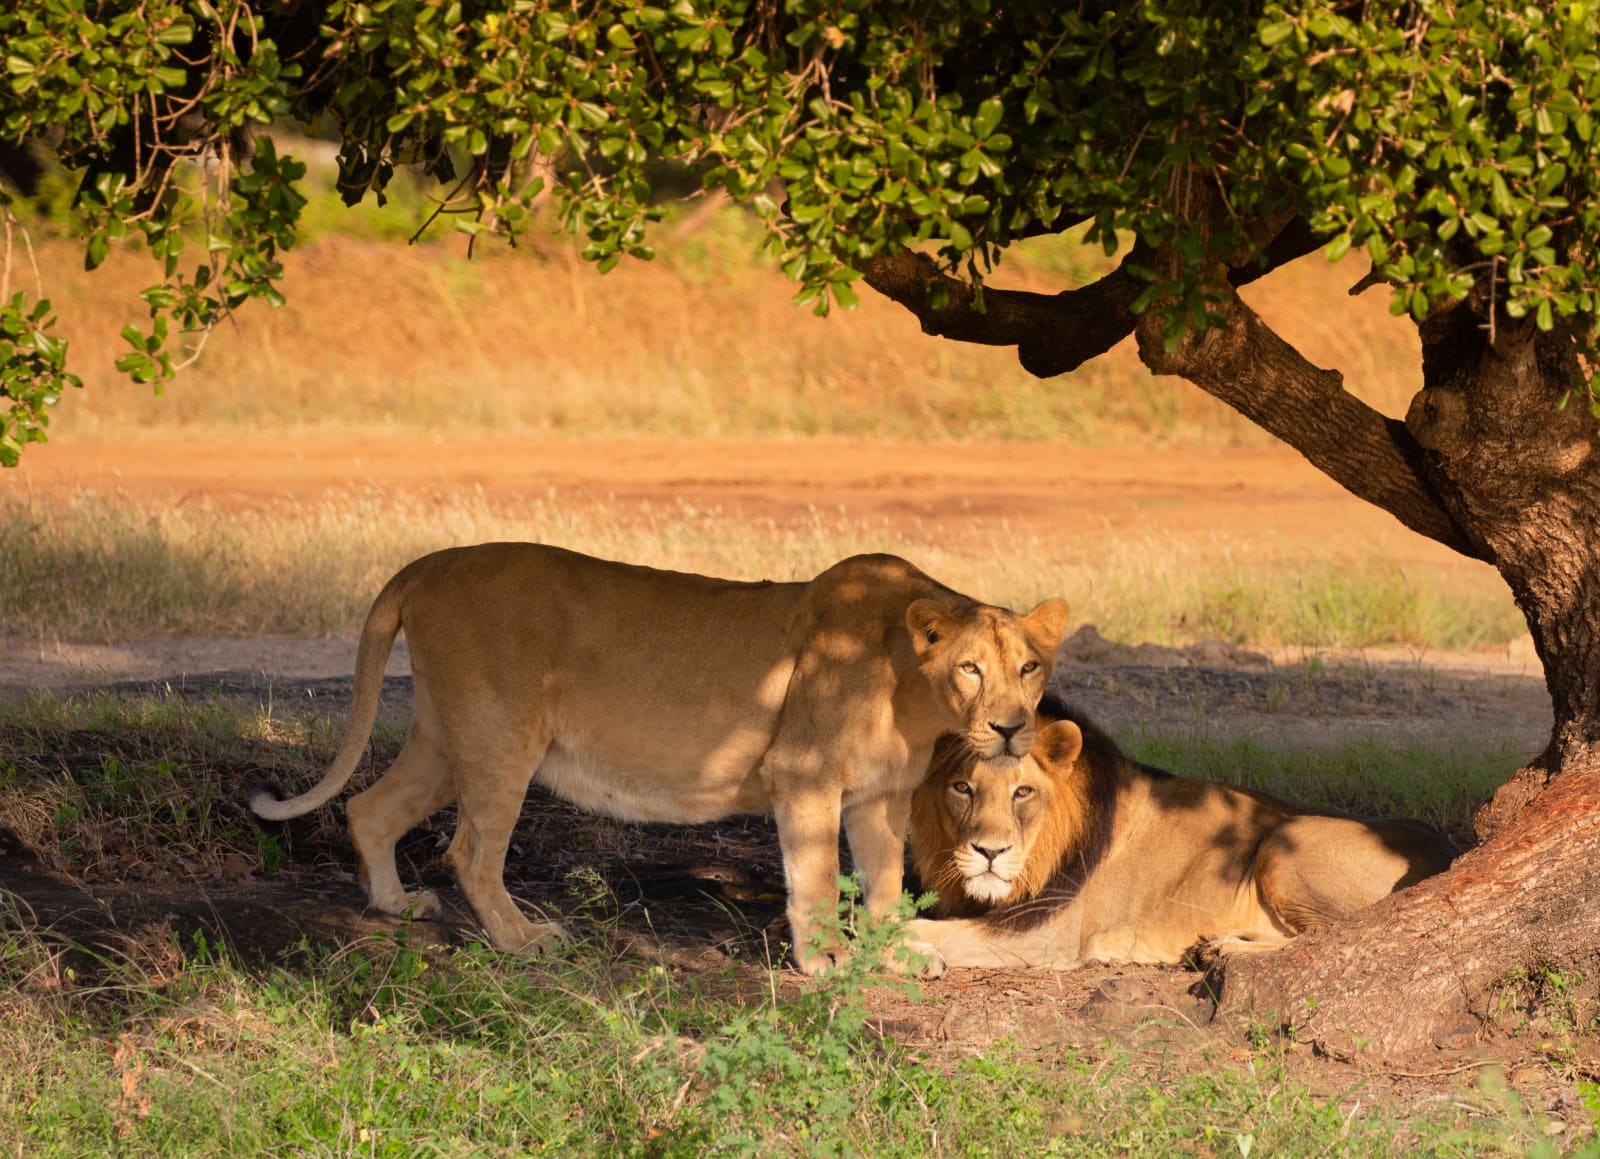 <p class="wp-caption-text">Image Credit: Shutterstock / Kaushik Ghelani</p>  <p><span>Gir National Park is the last bastion of the Asiatic lion, offering a rare opportunity to witness these majestic creatures in their natural habitat. Beyond lions, Gir is home to leopards, antelopes, vultures, and several other wildlife species. The semi-arid deciduous forest and savannah-like grasslands provide a unique ecosystem for safari-goers. Jeep safaris are the primary means of exploring the park, with guides providing insights into the conservation success story of the Asiatic lion.</span></p>